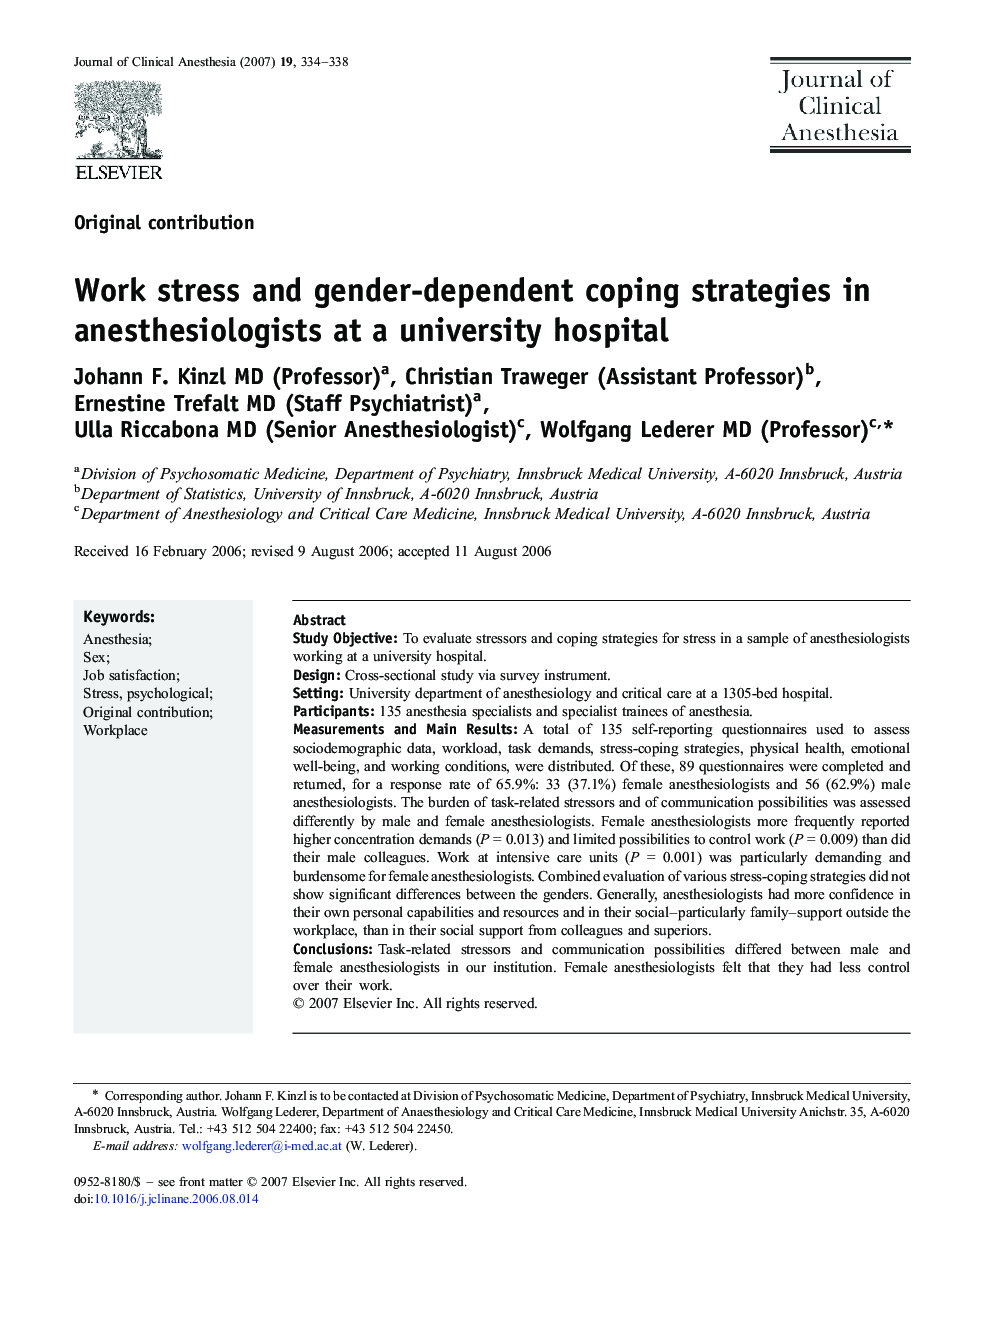 Work stress and gender-dependent coping strategies in anesthesiologists at a university hospital